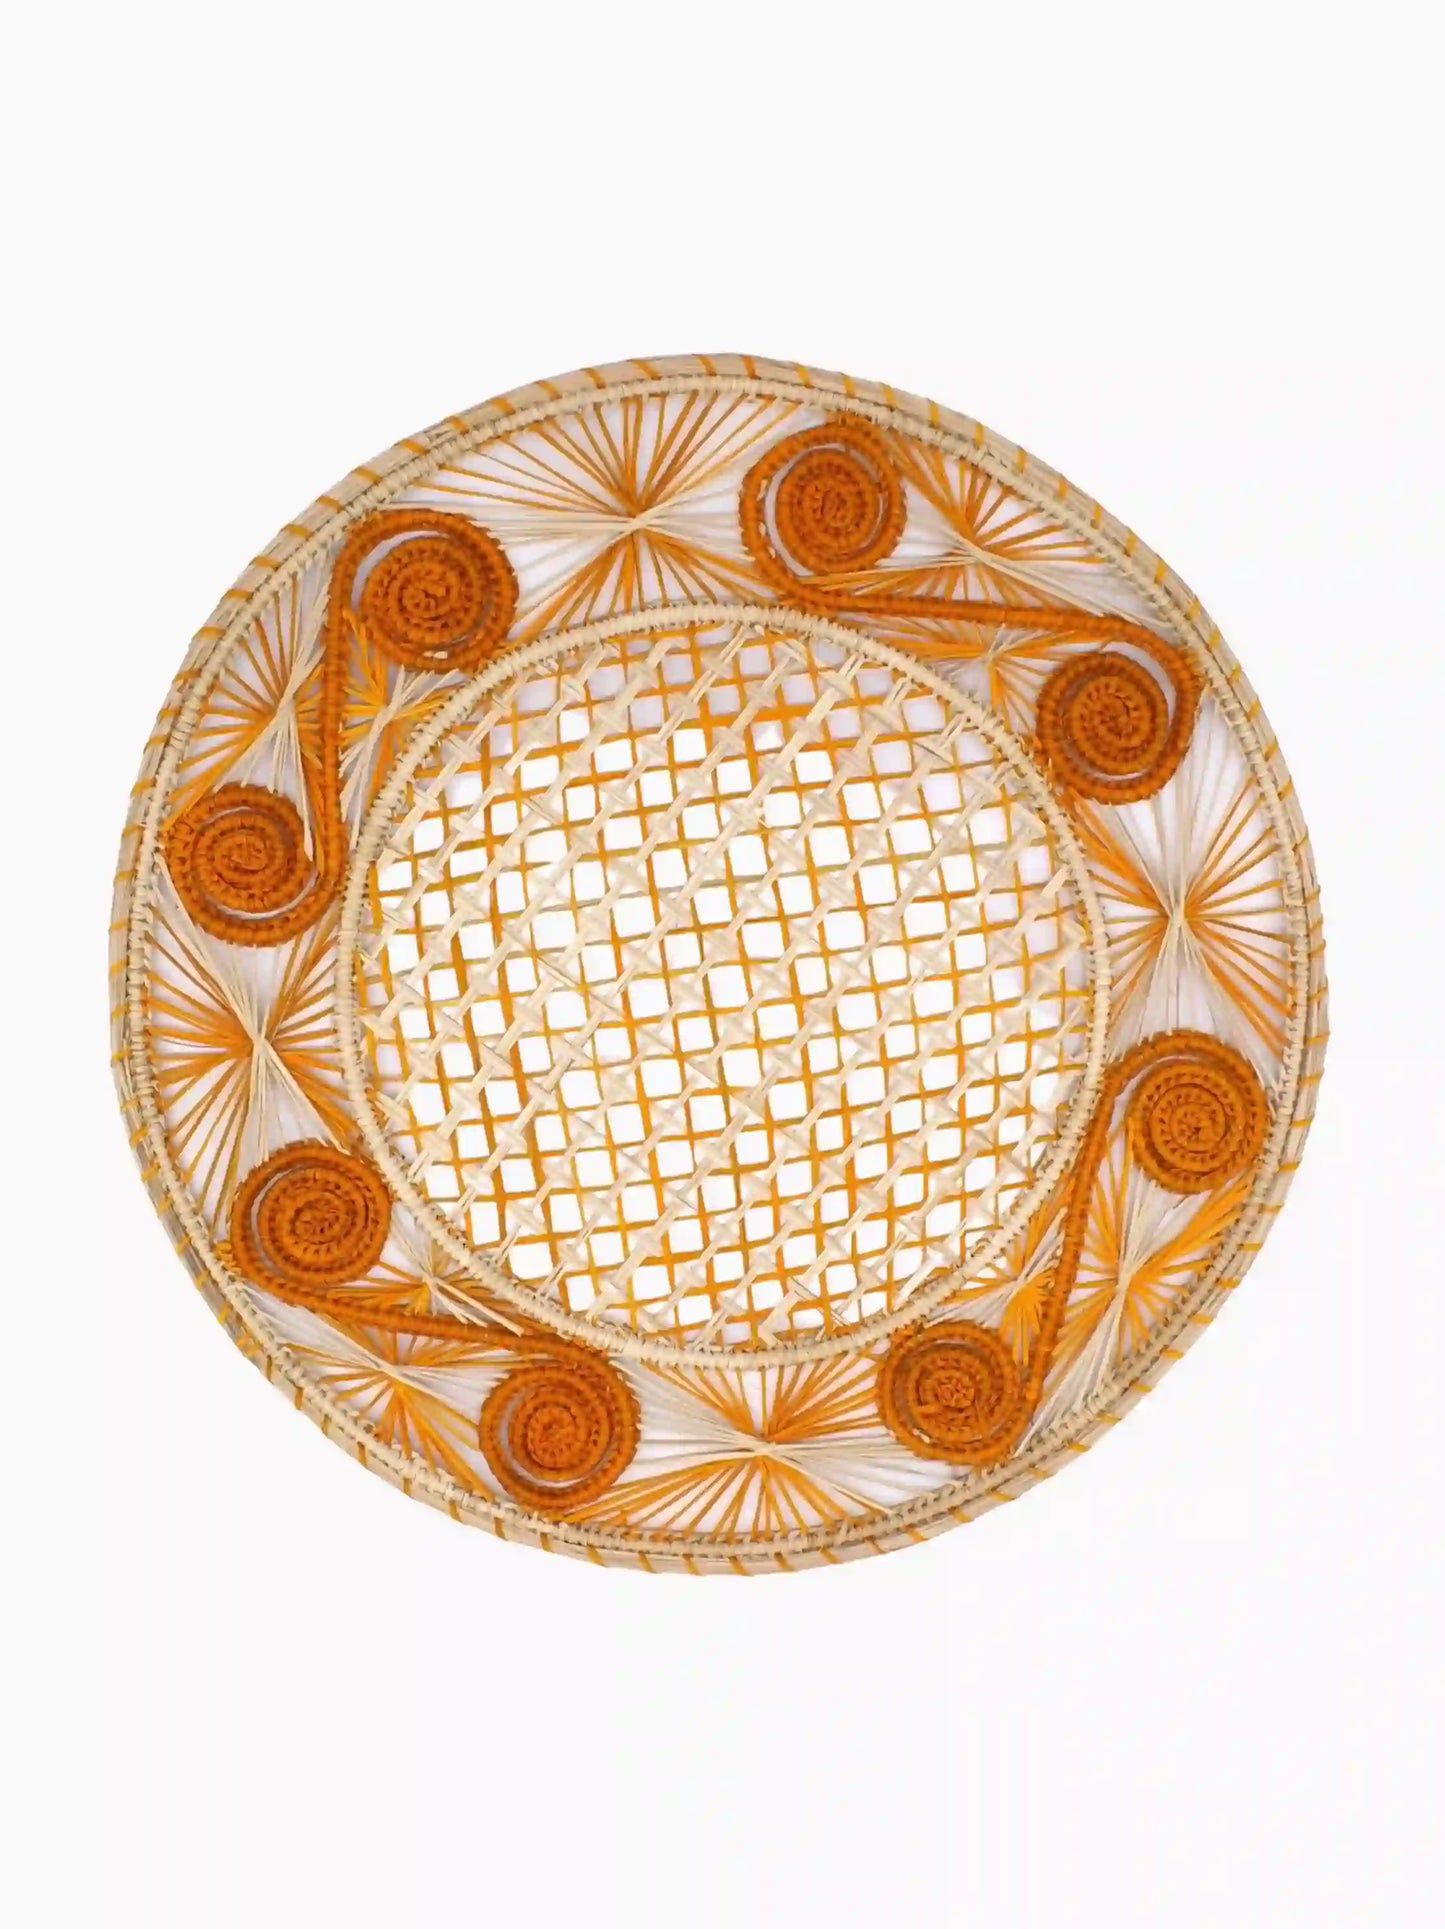 Woven Straw Spiral Placemats Set